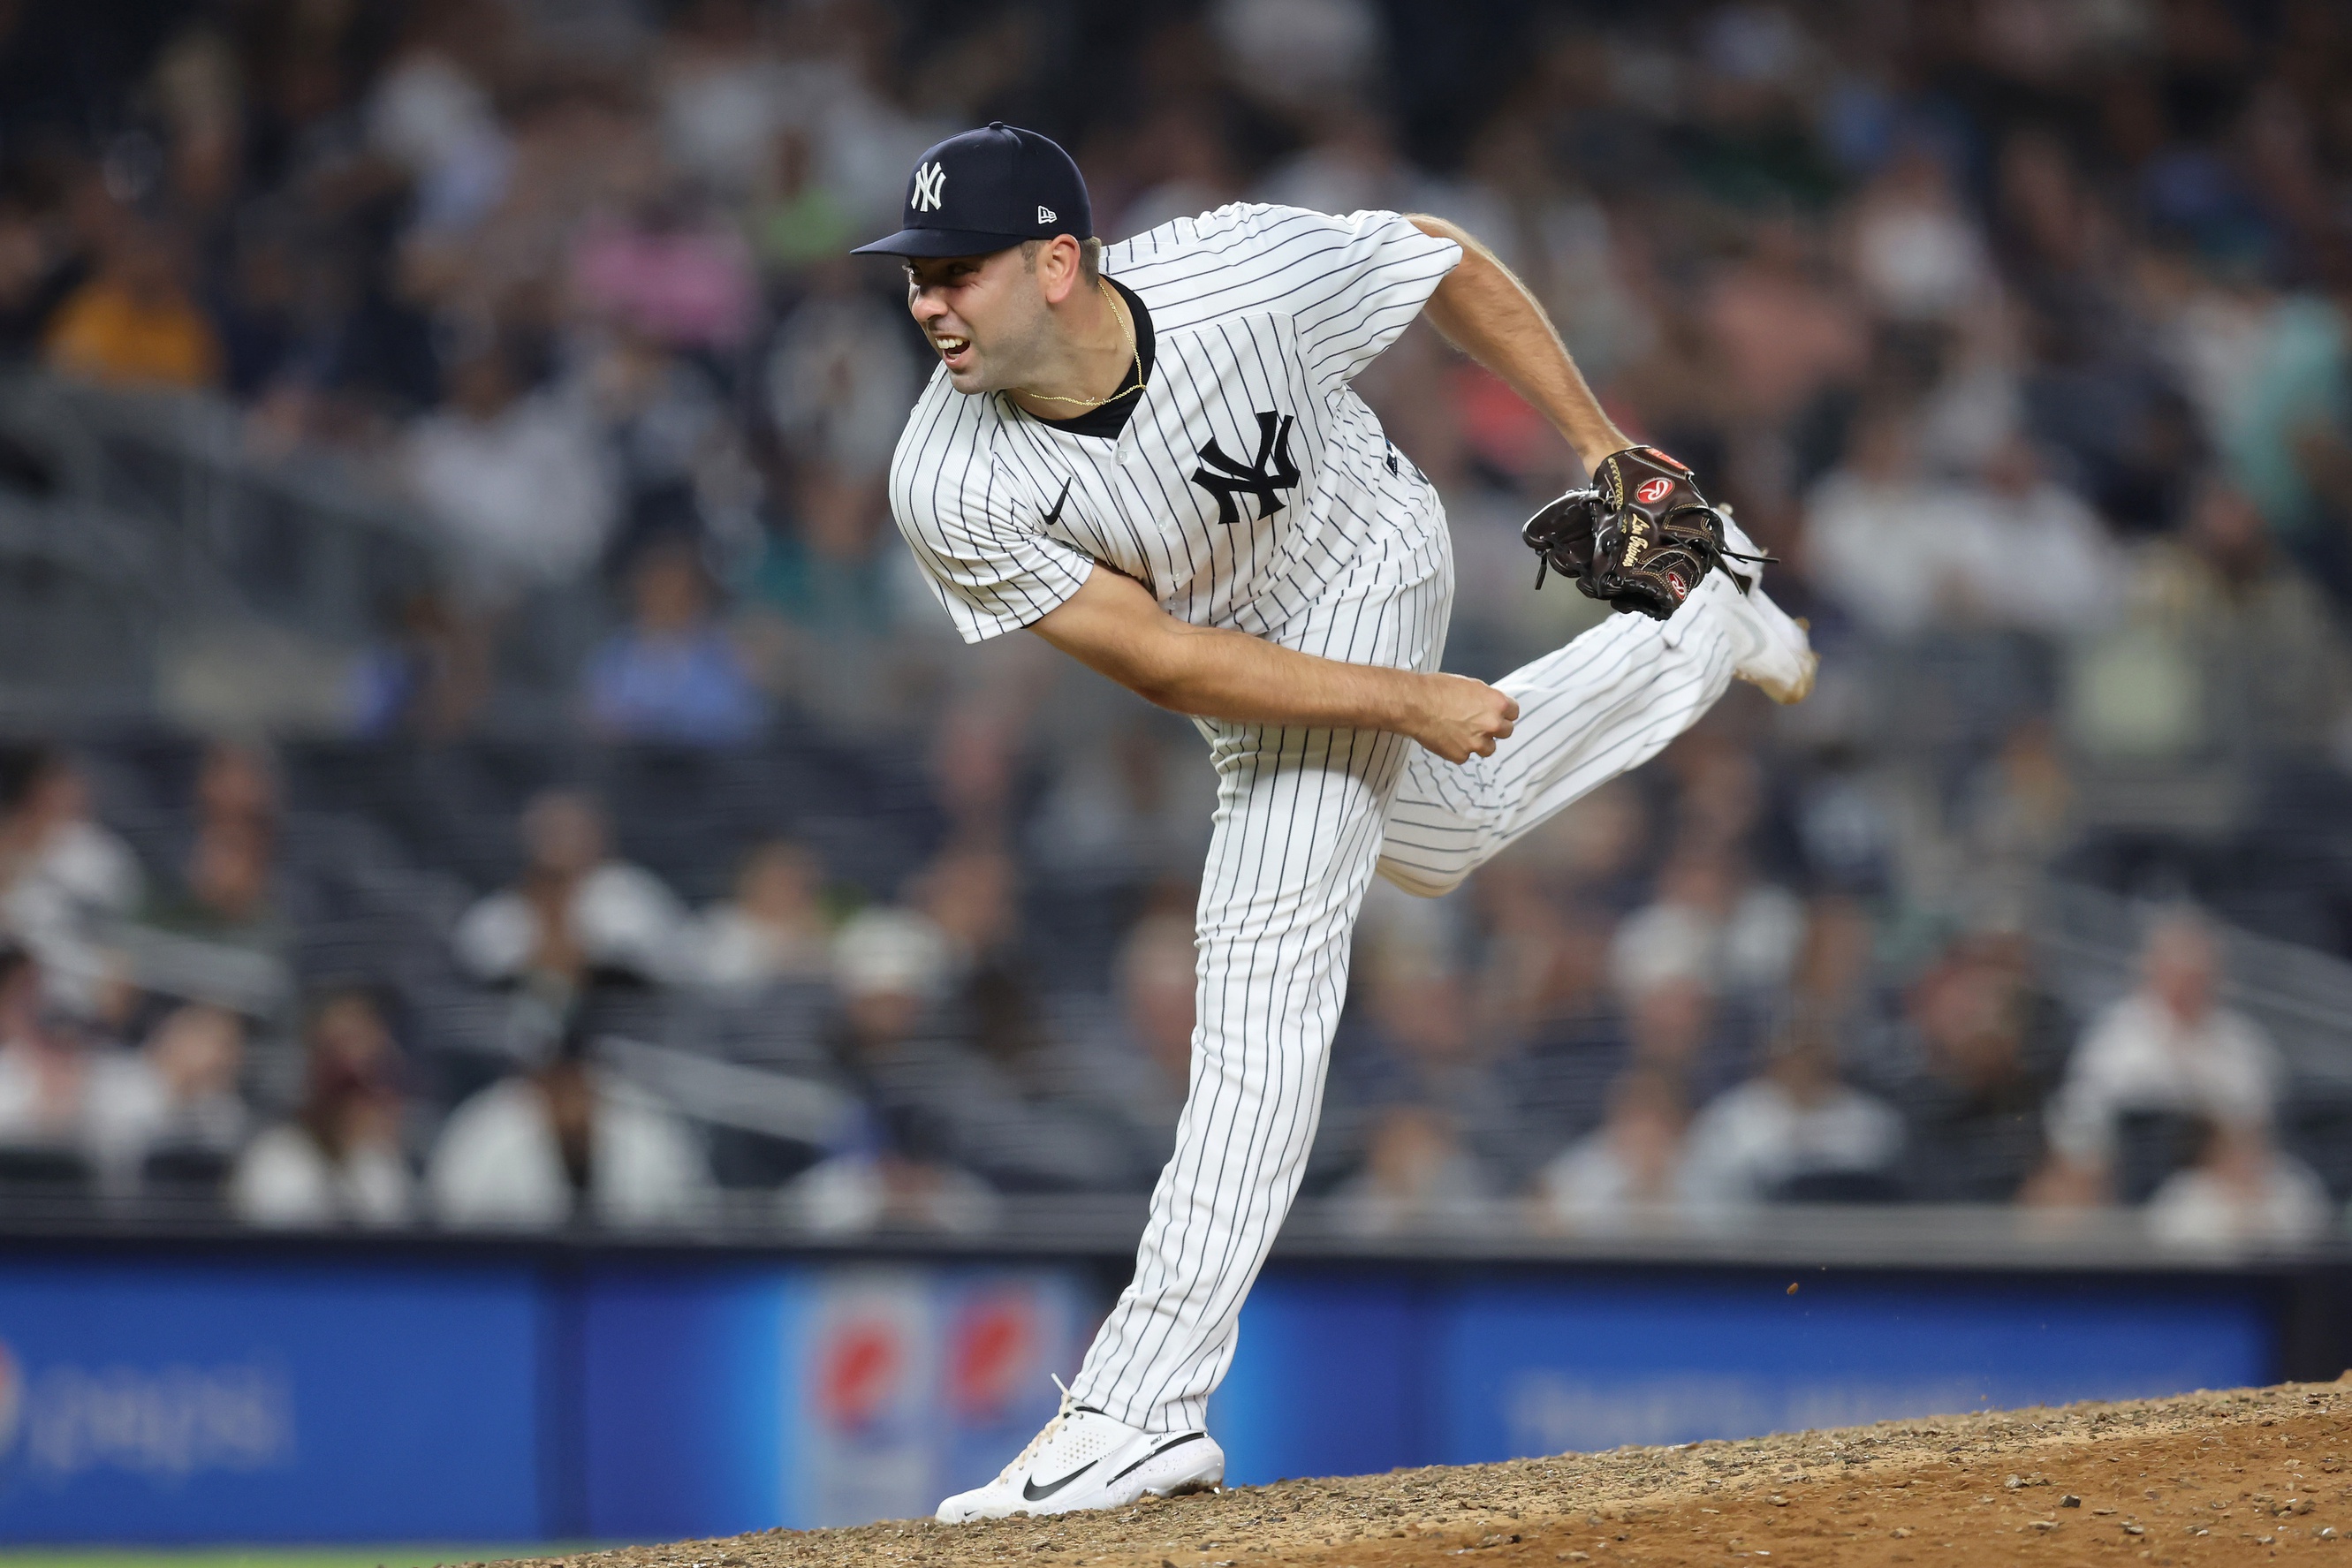 Yankees reliever Trivino warms up in wrong jersey, changes - The San Diego  Union-Tribune